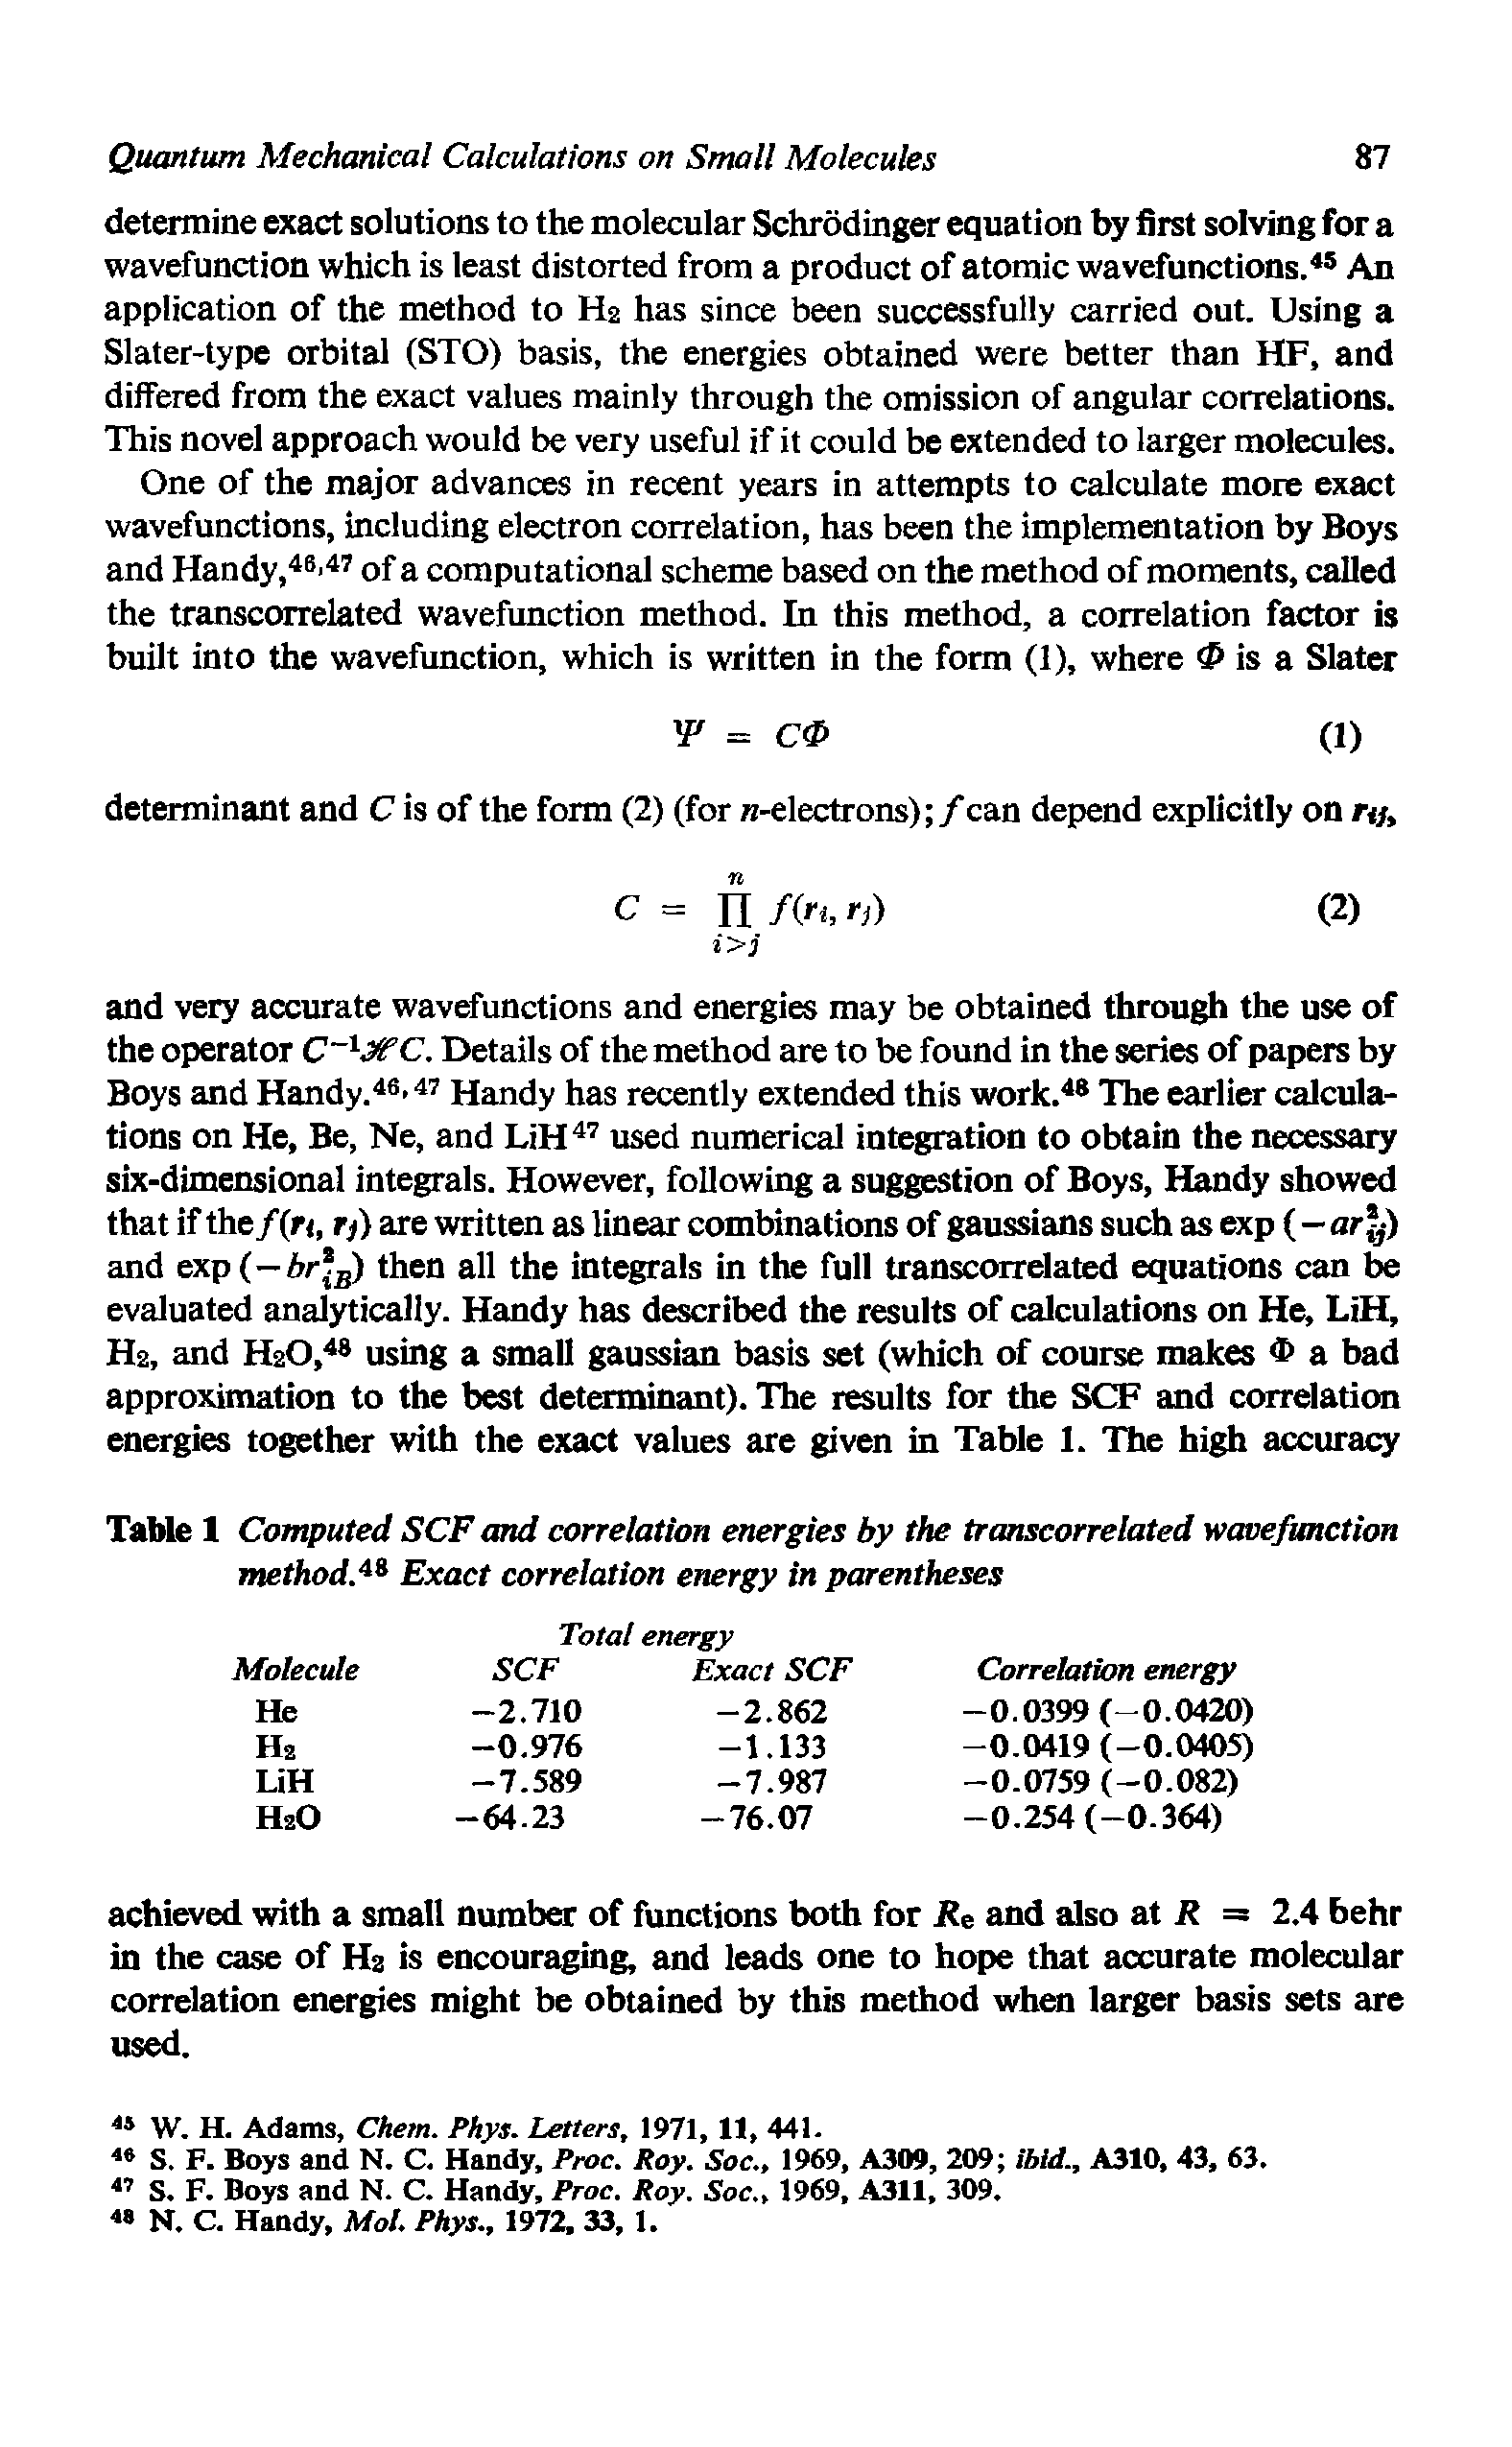 Table 1 Computed SCF and correlation energies by the transcorrelated wavefunction method.43 Exact correlation energy in parentheses...